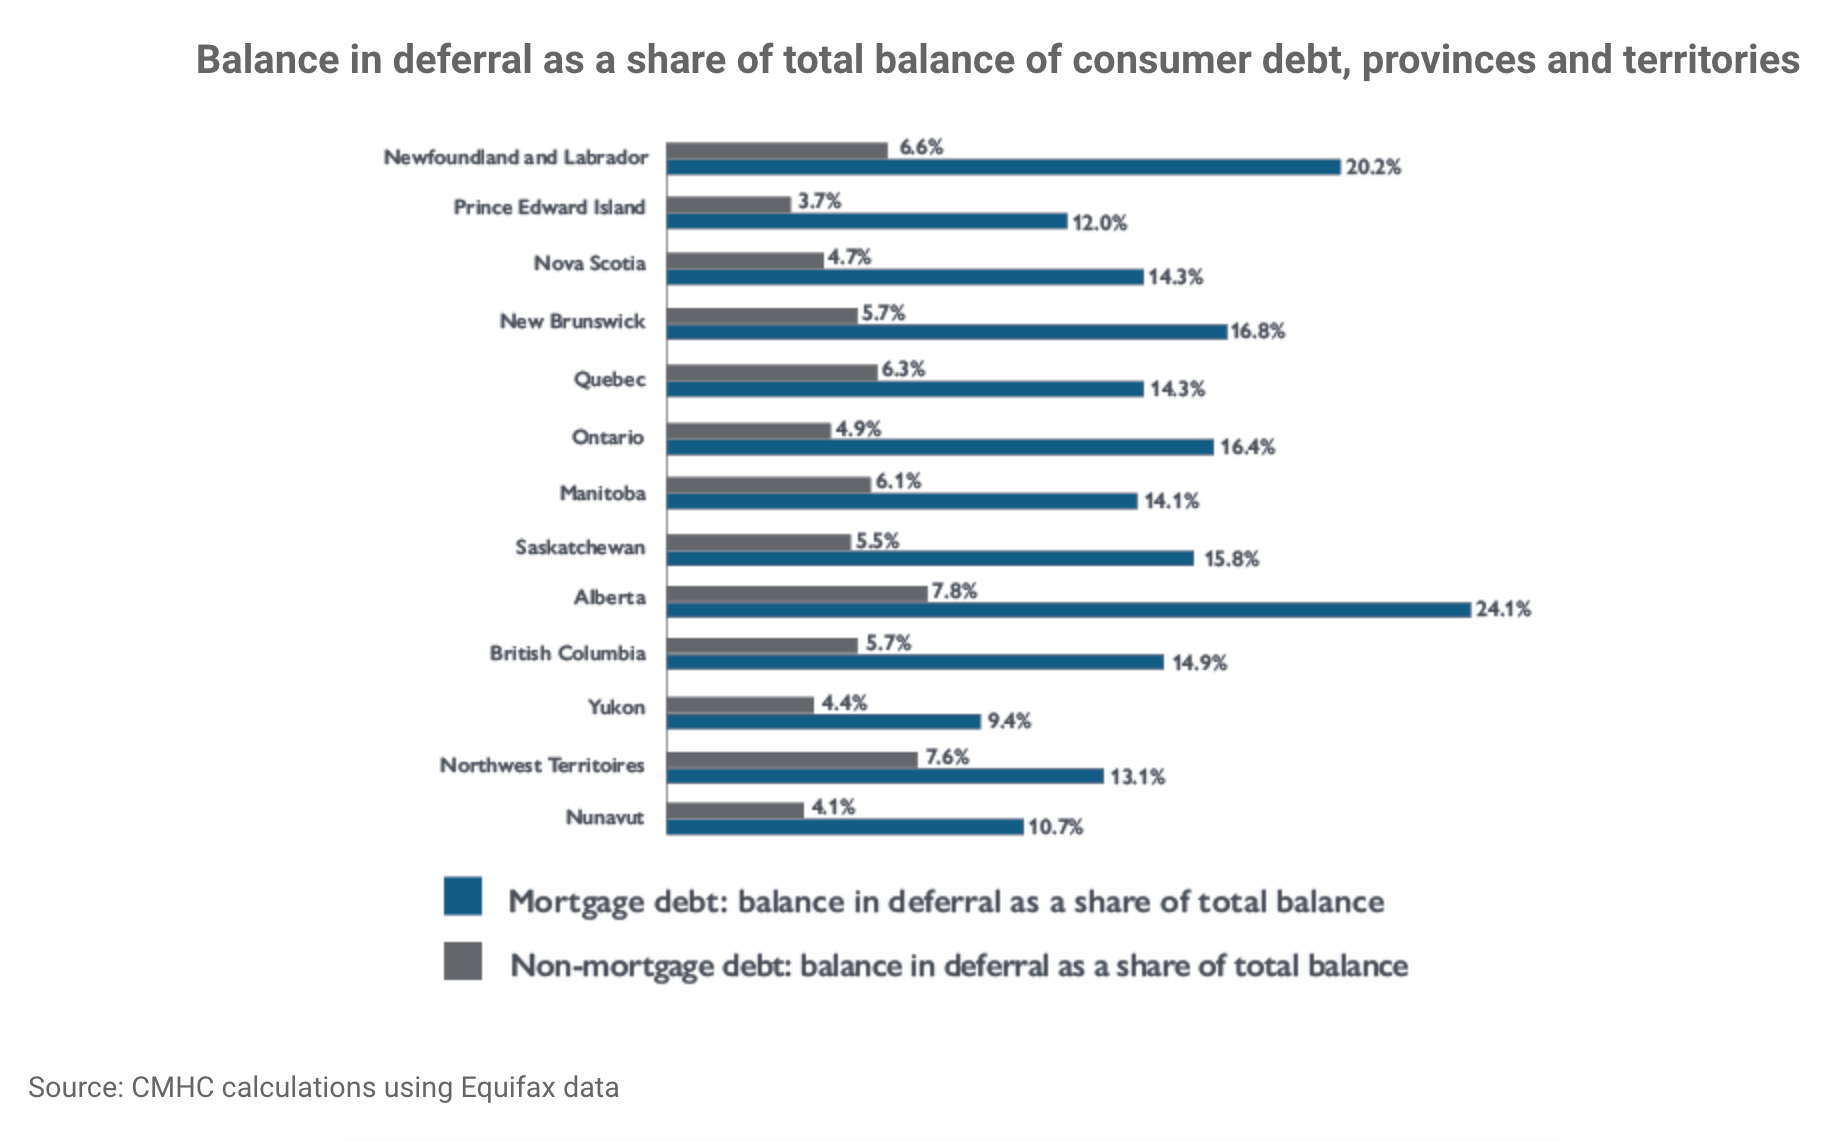 Chart showing deferred debt by province.